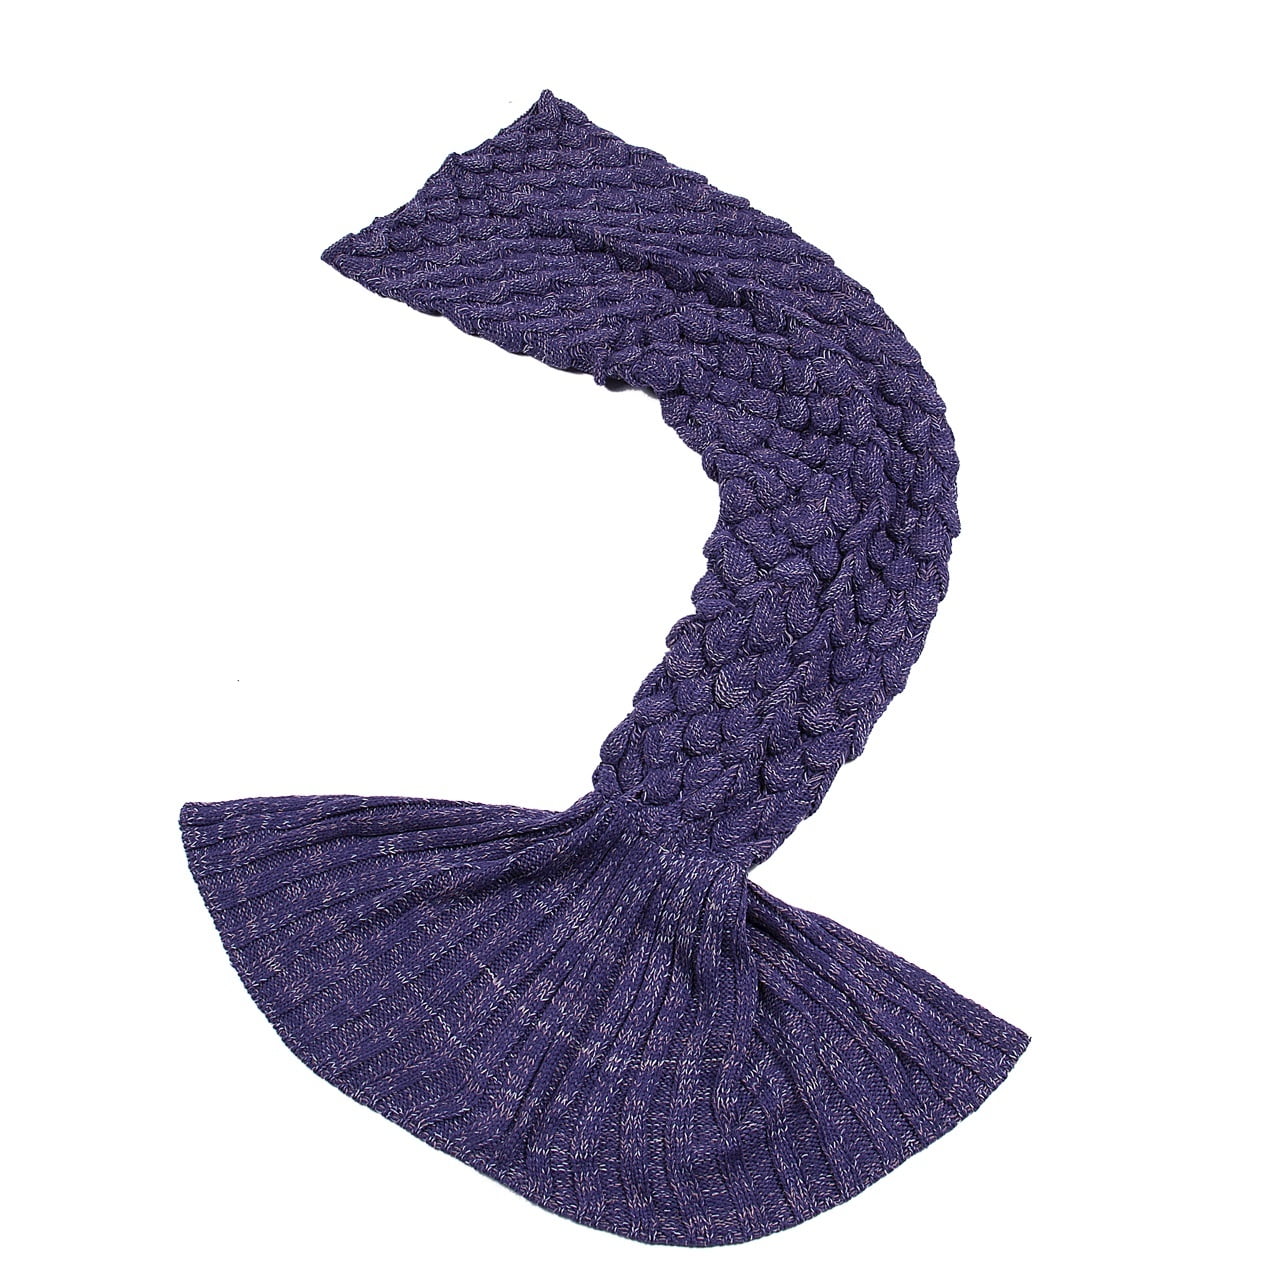 New Mermaid Tail Handmade Crocheted Cocoon Quilt Knit Soft Warm Lapghan Blanket 